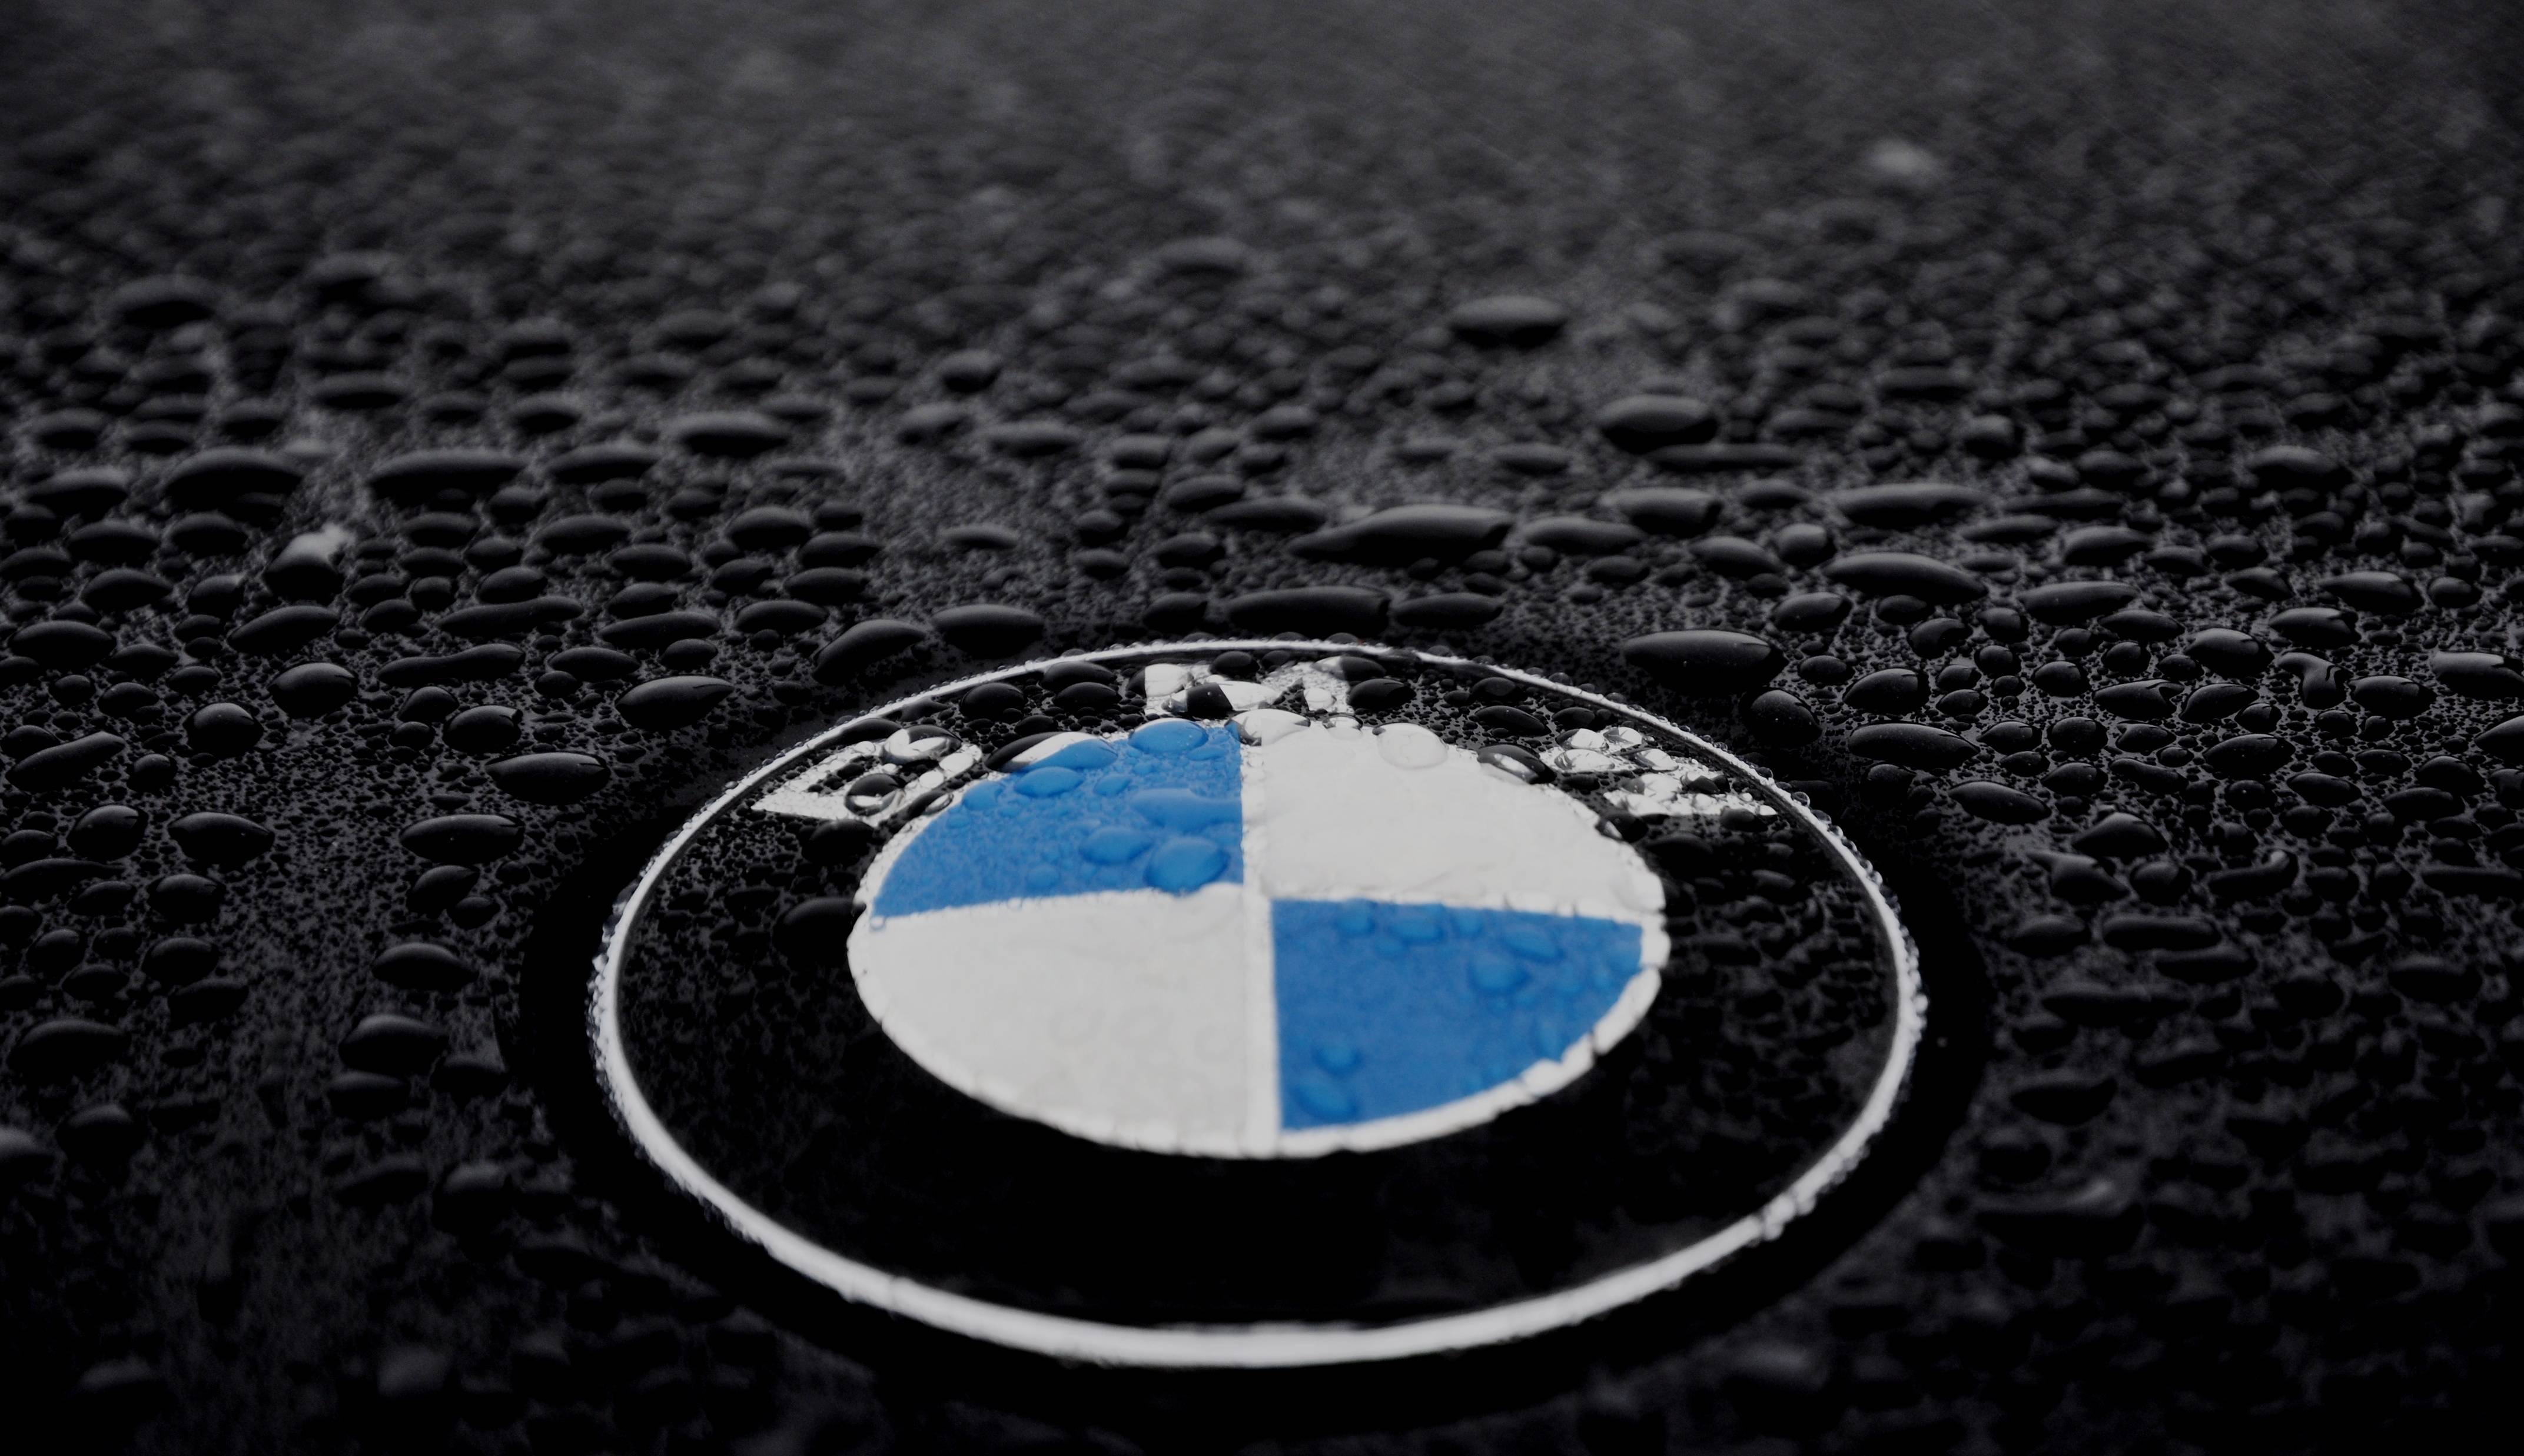 bmw logo cars best cool wallpapers | Desktop Backgrounds for Free ...